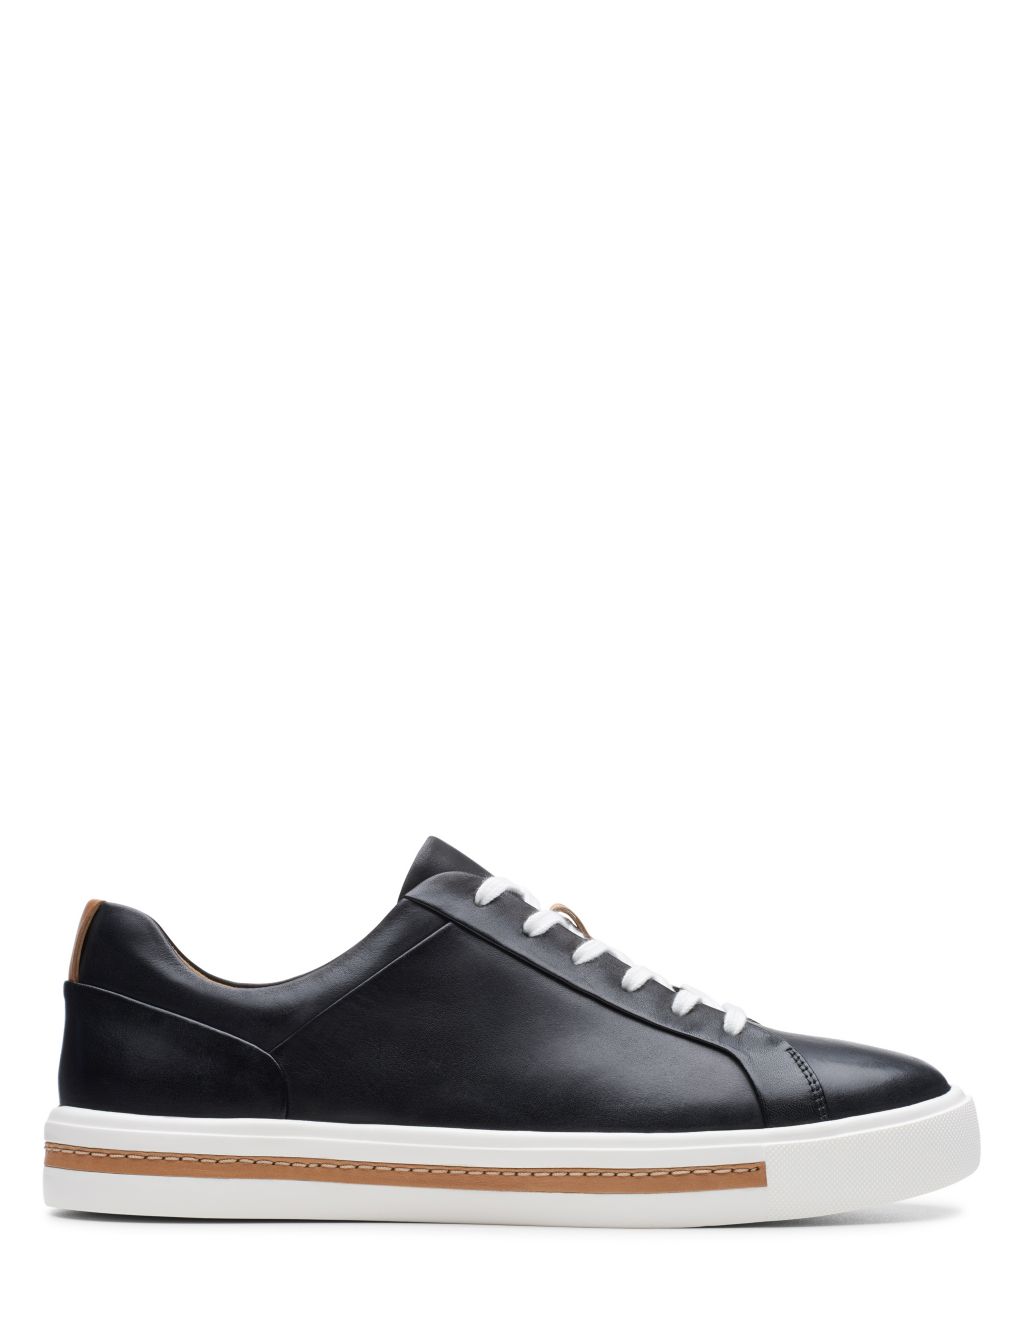 Wide Fit Leather Lace Up Trainers image 1